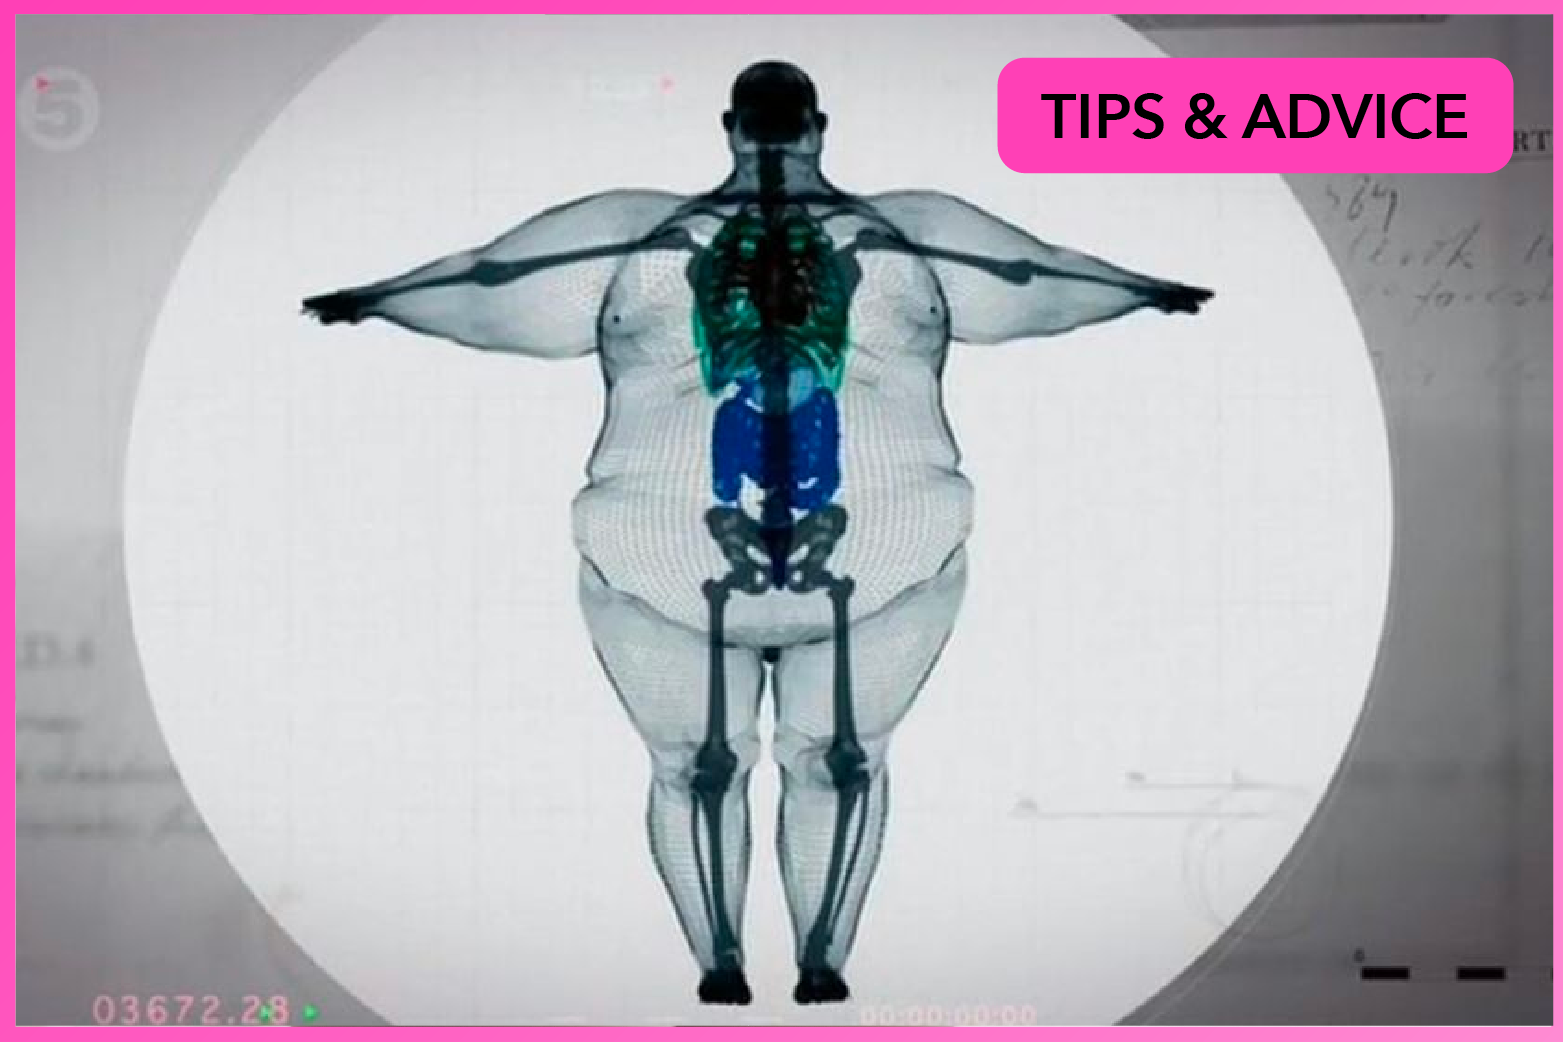 Yes, You Can Be 'Big Boned' (But That's Not Why You're Overweight